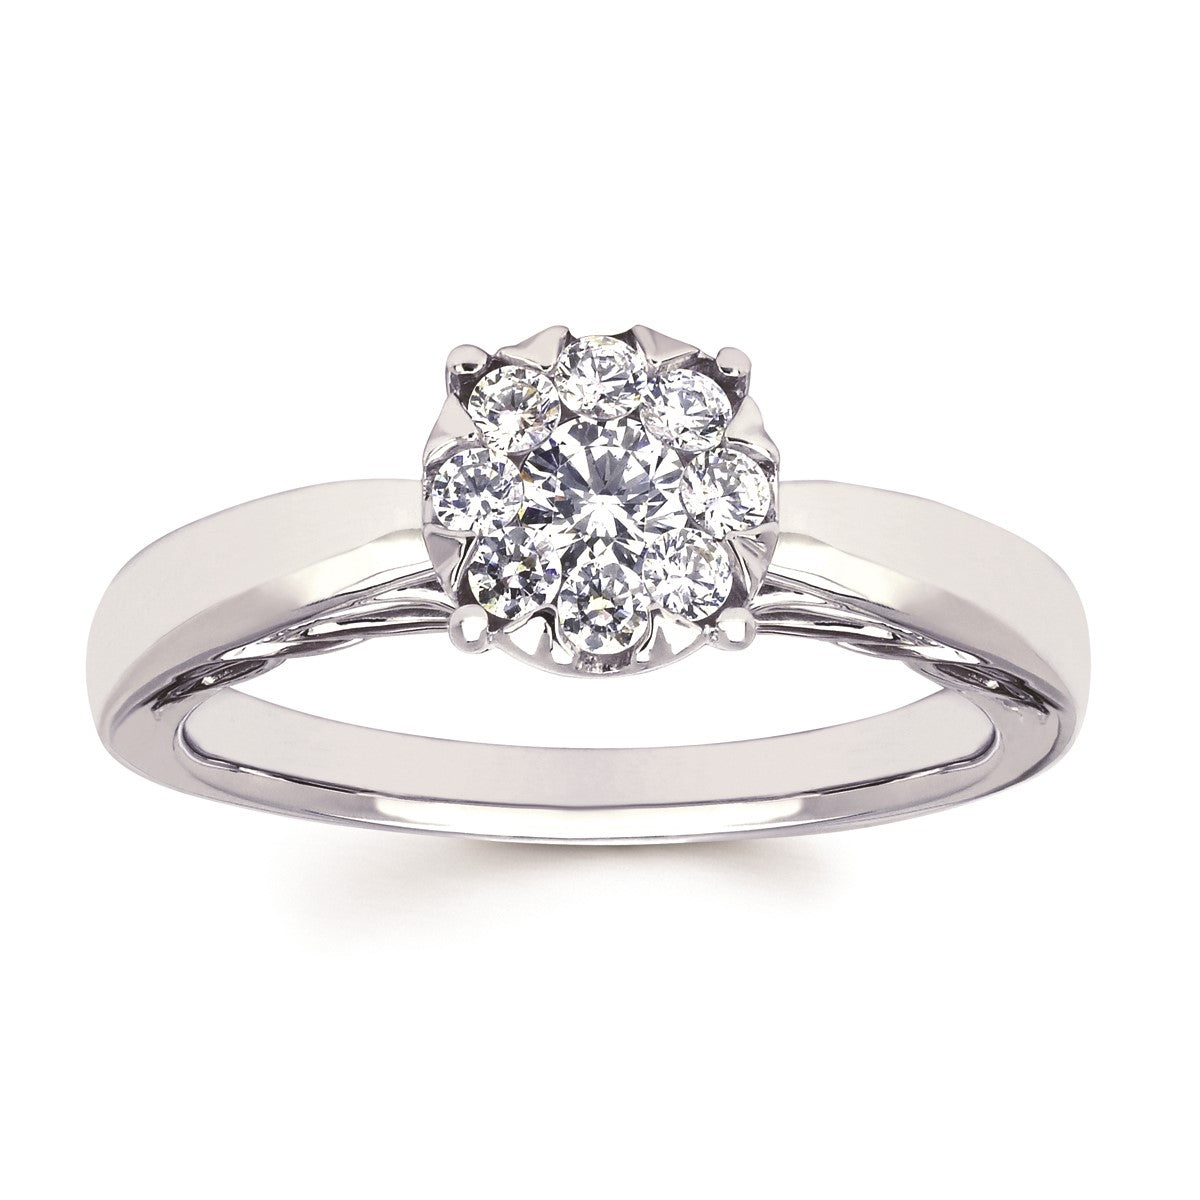 Multi-Center Round Solitaire Engagement Ring